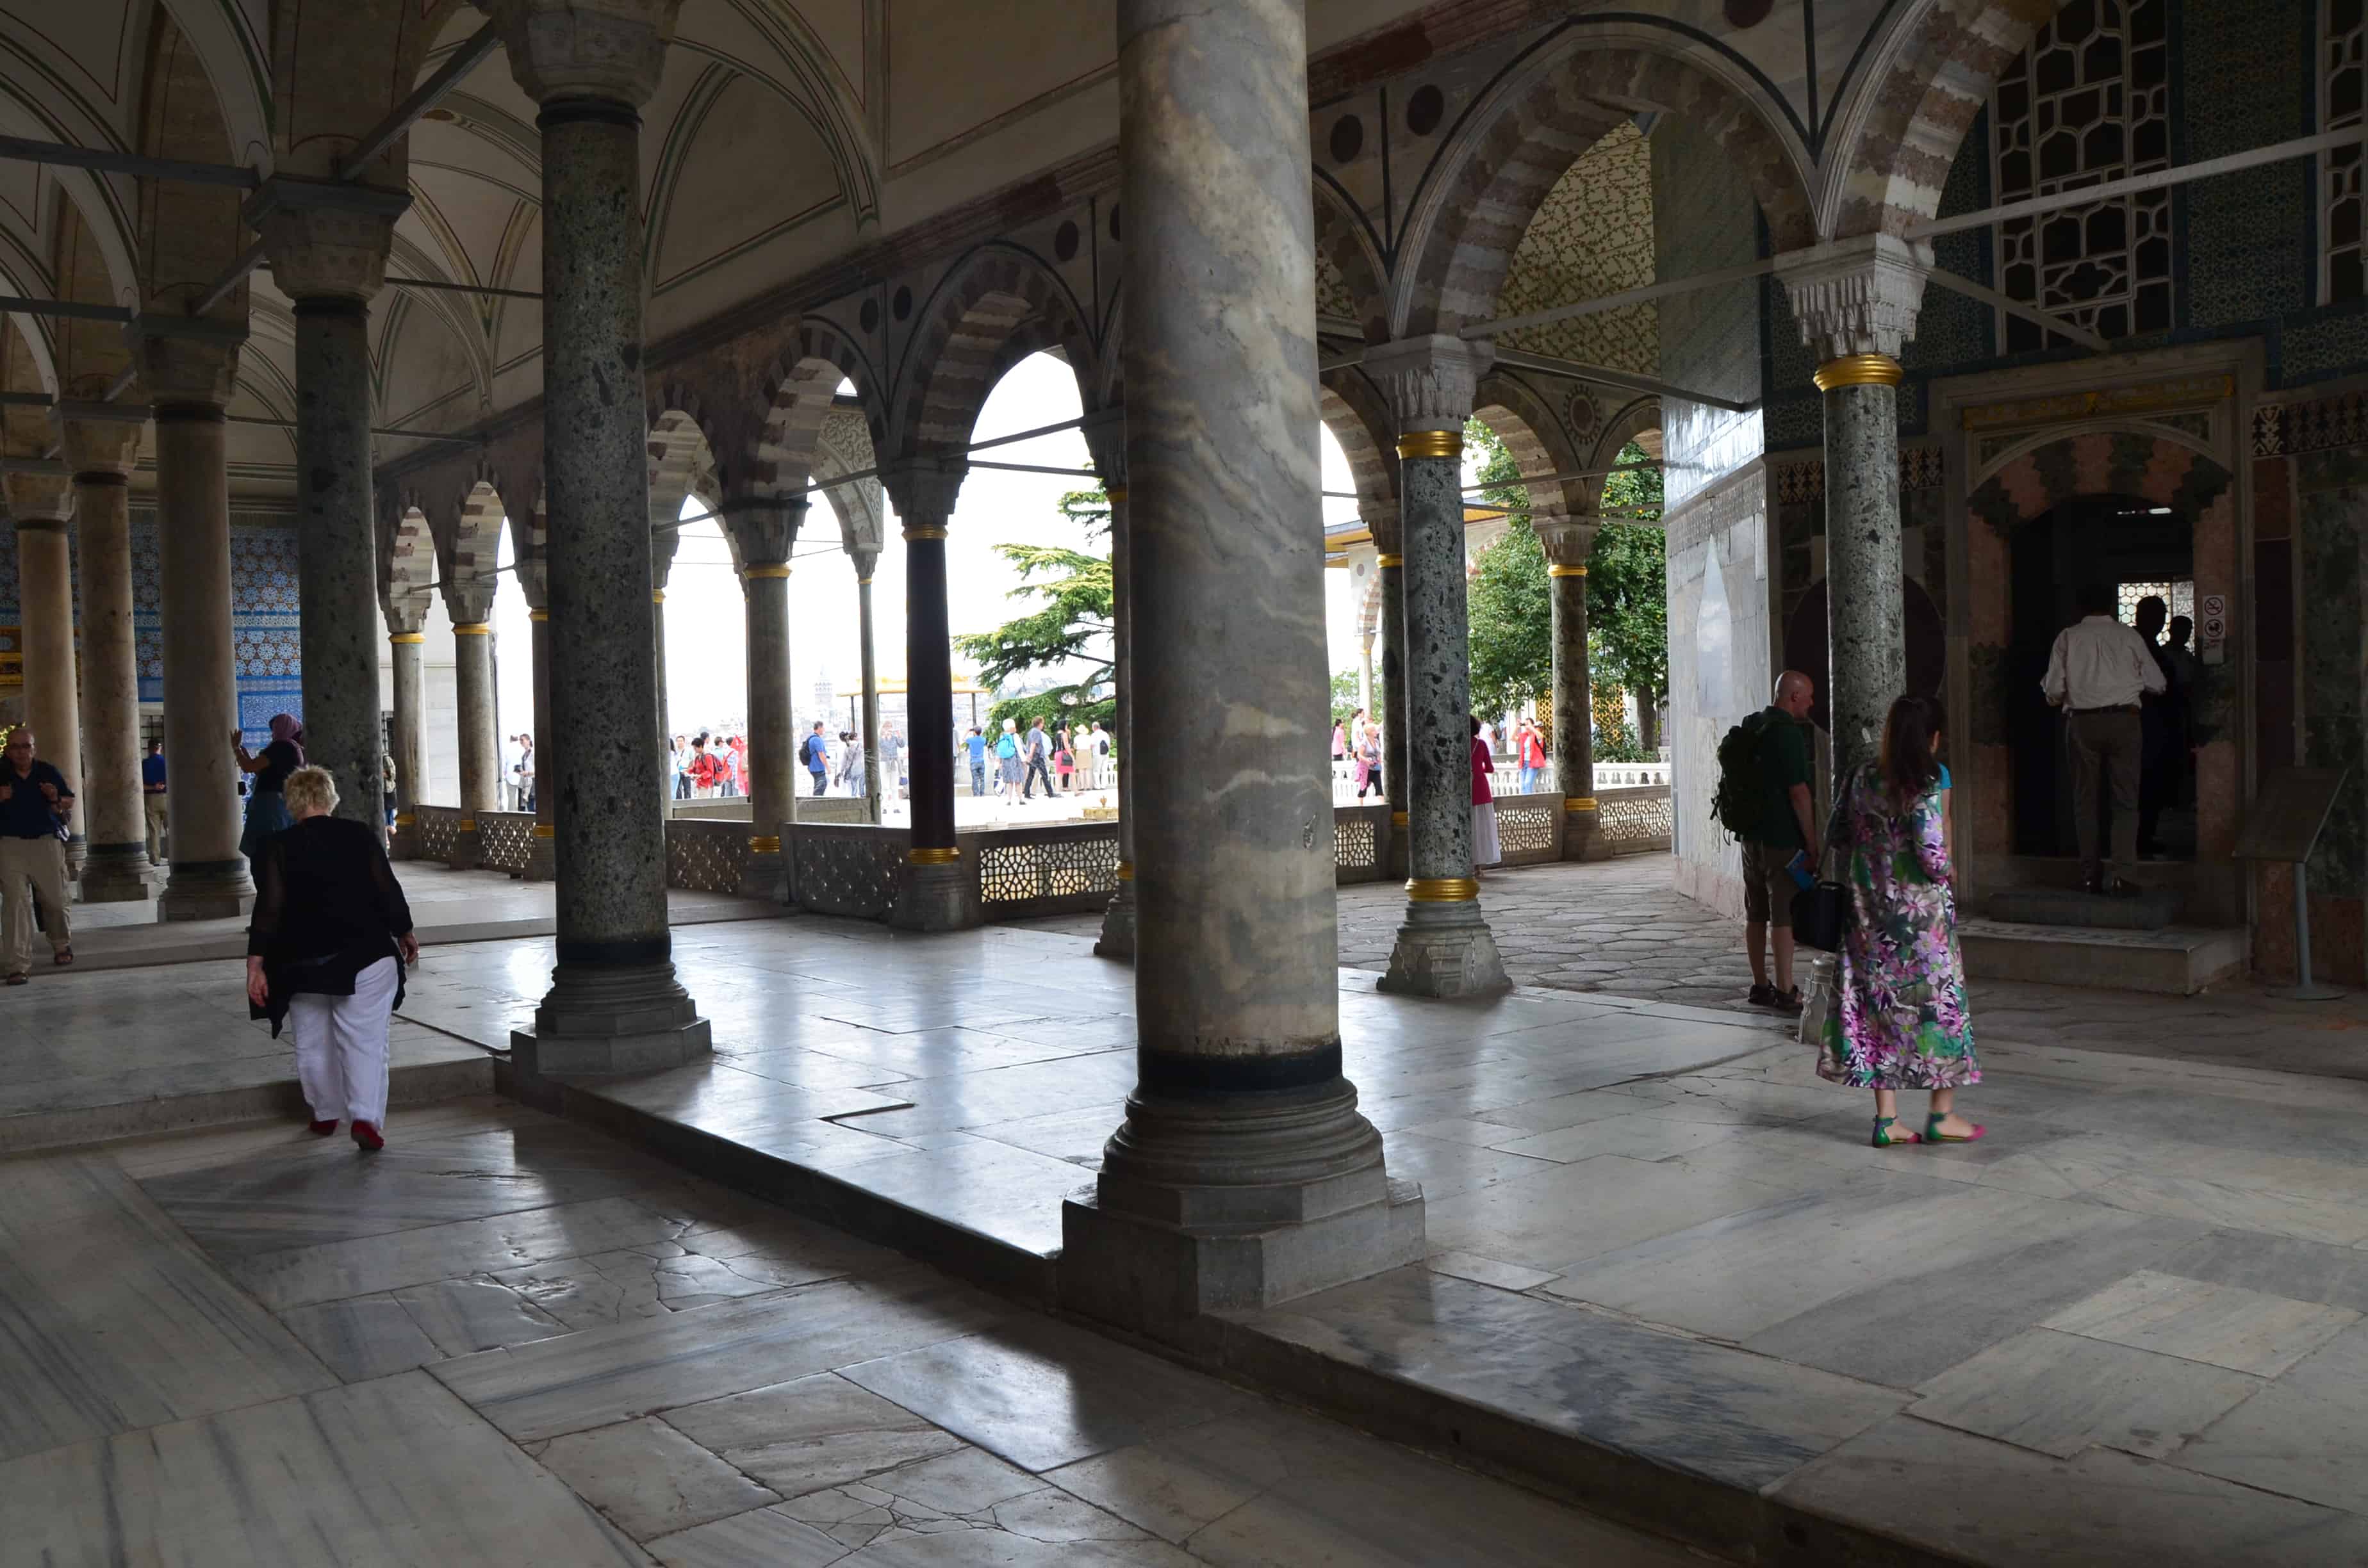 Under the colonnade of the Marble Terrace